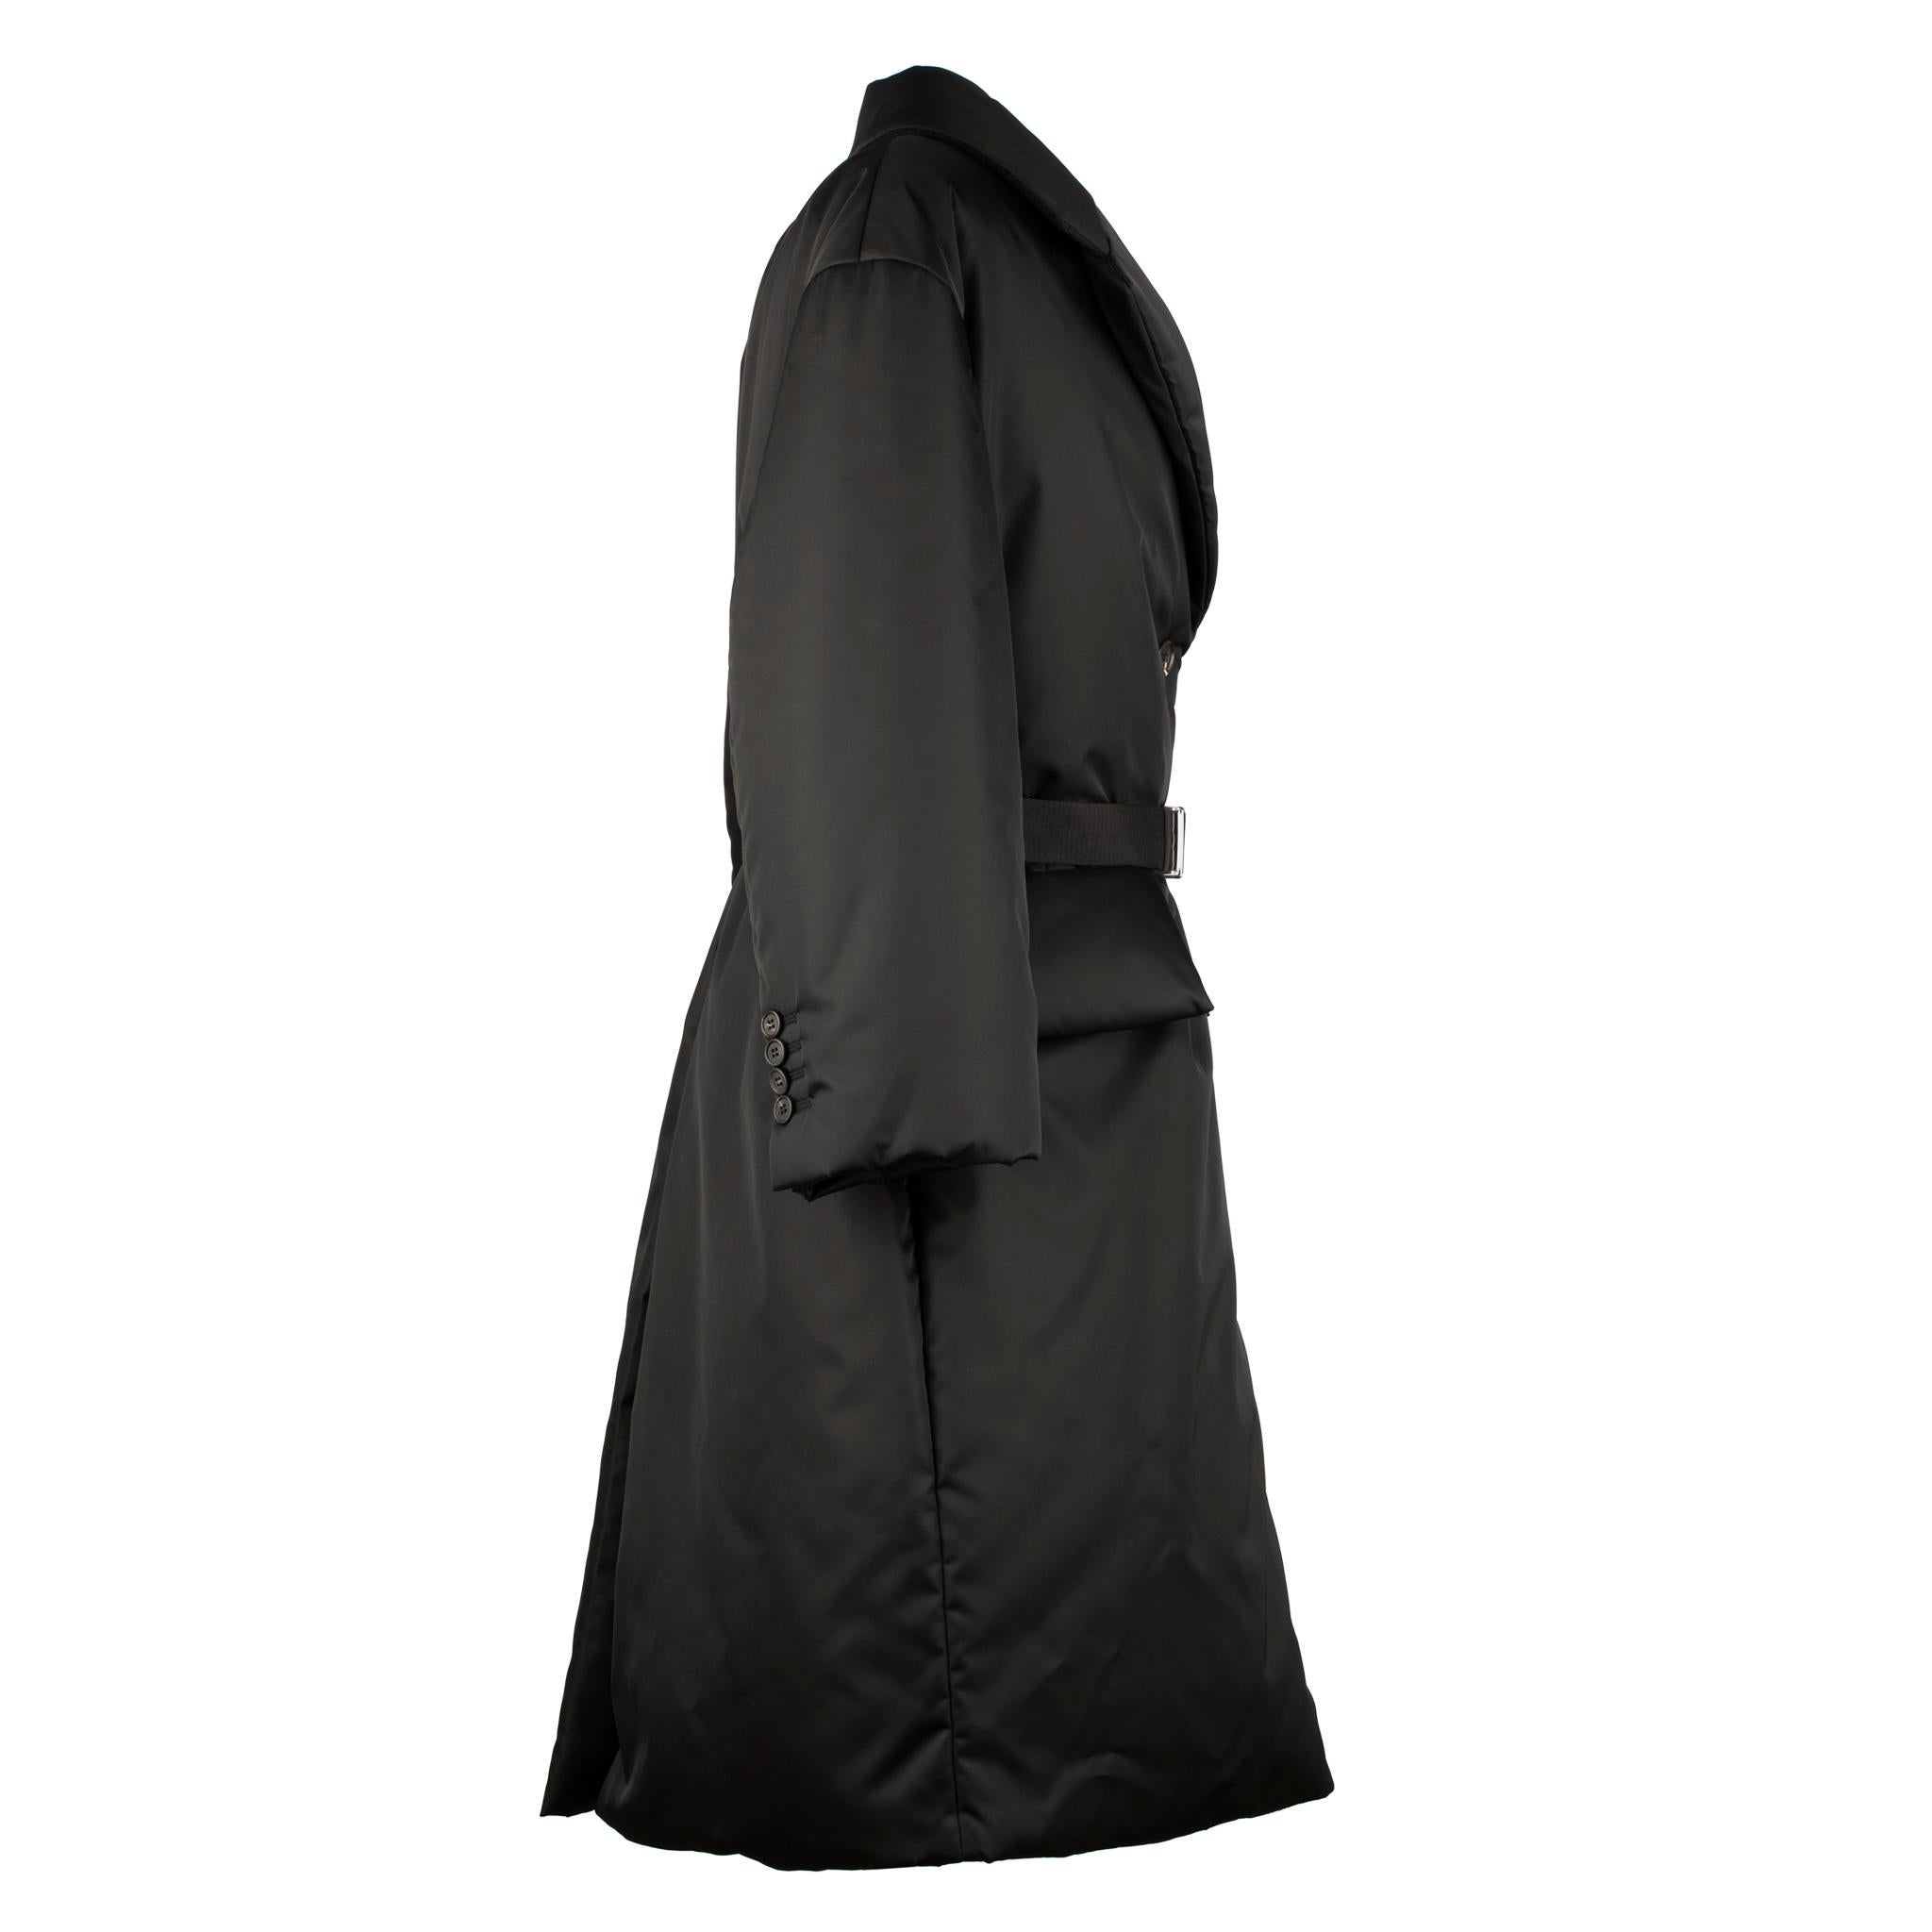 Prada Re-Nylon Black Quilted Coat With Belt

This Prada Re-Nylon Black Quilted Coat With Belt 40 It will keep you warm through the winter. Crafted with a durable and sustainable quilted Re-Nylon material, this coat is designed for comfort without